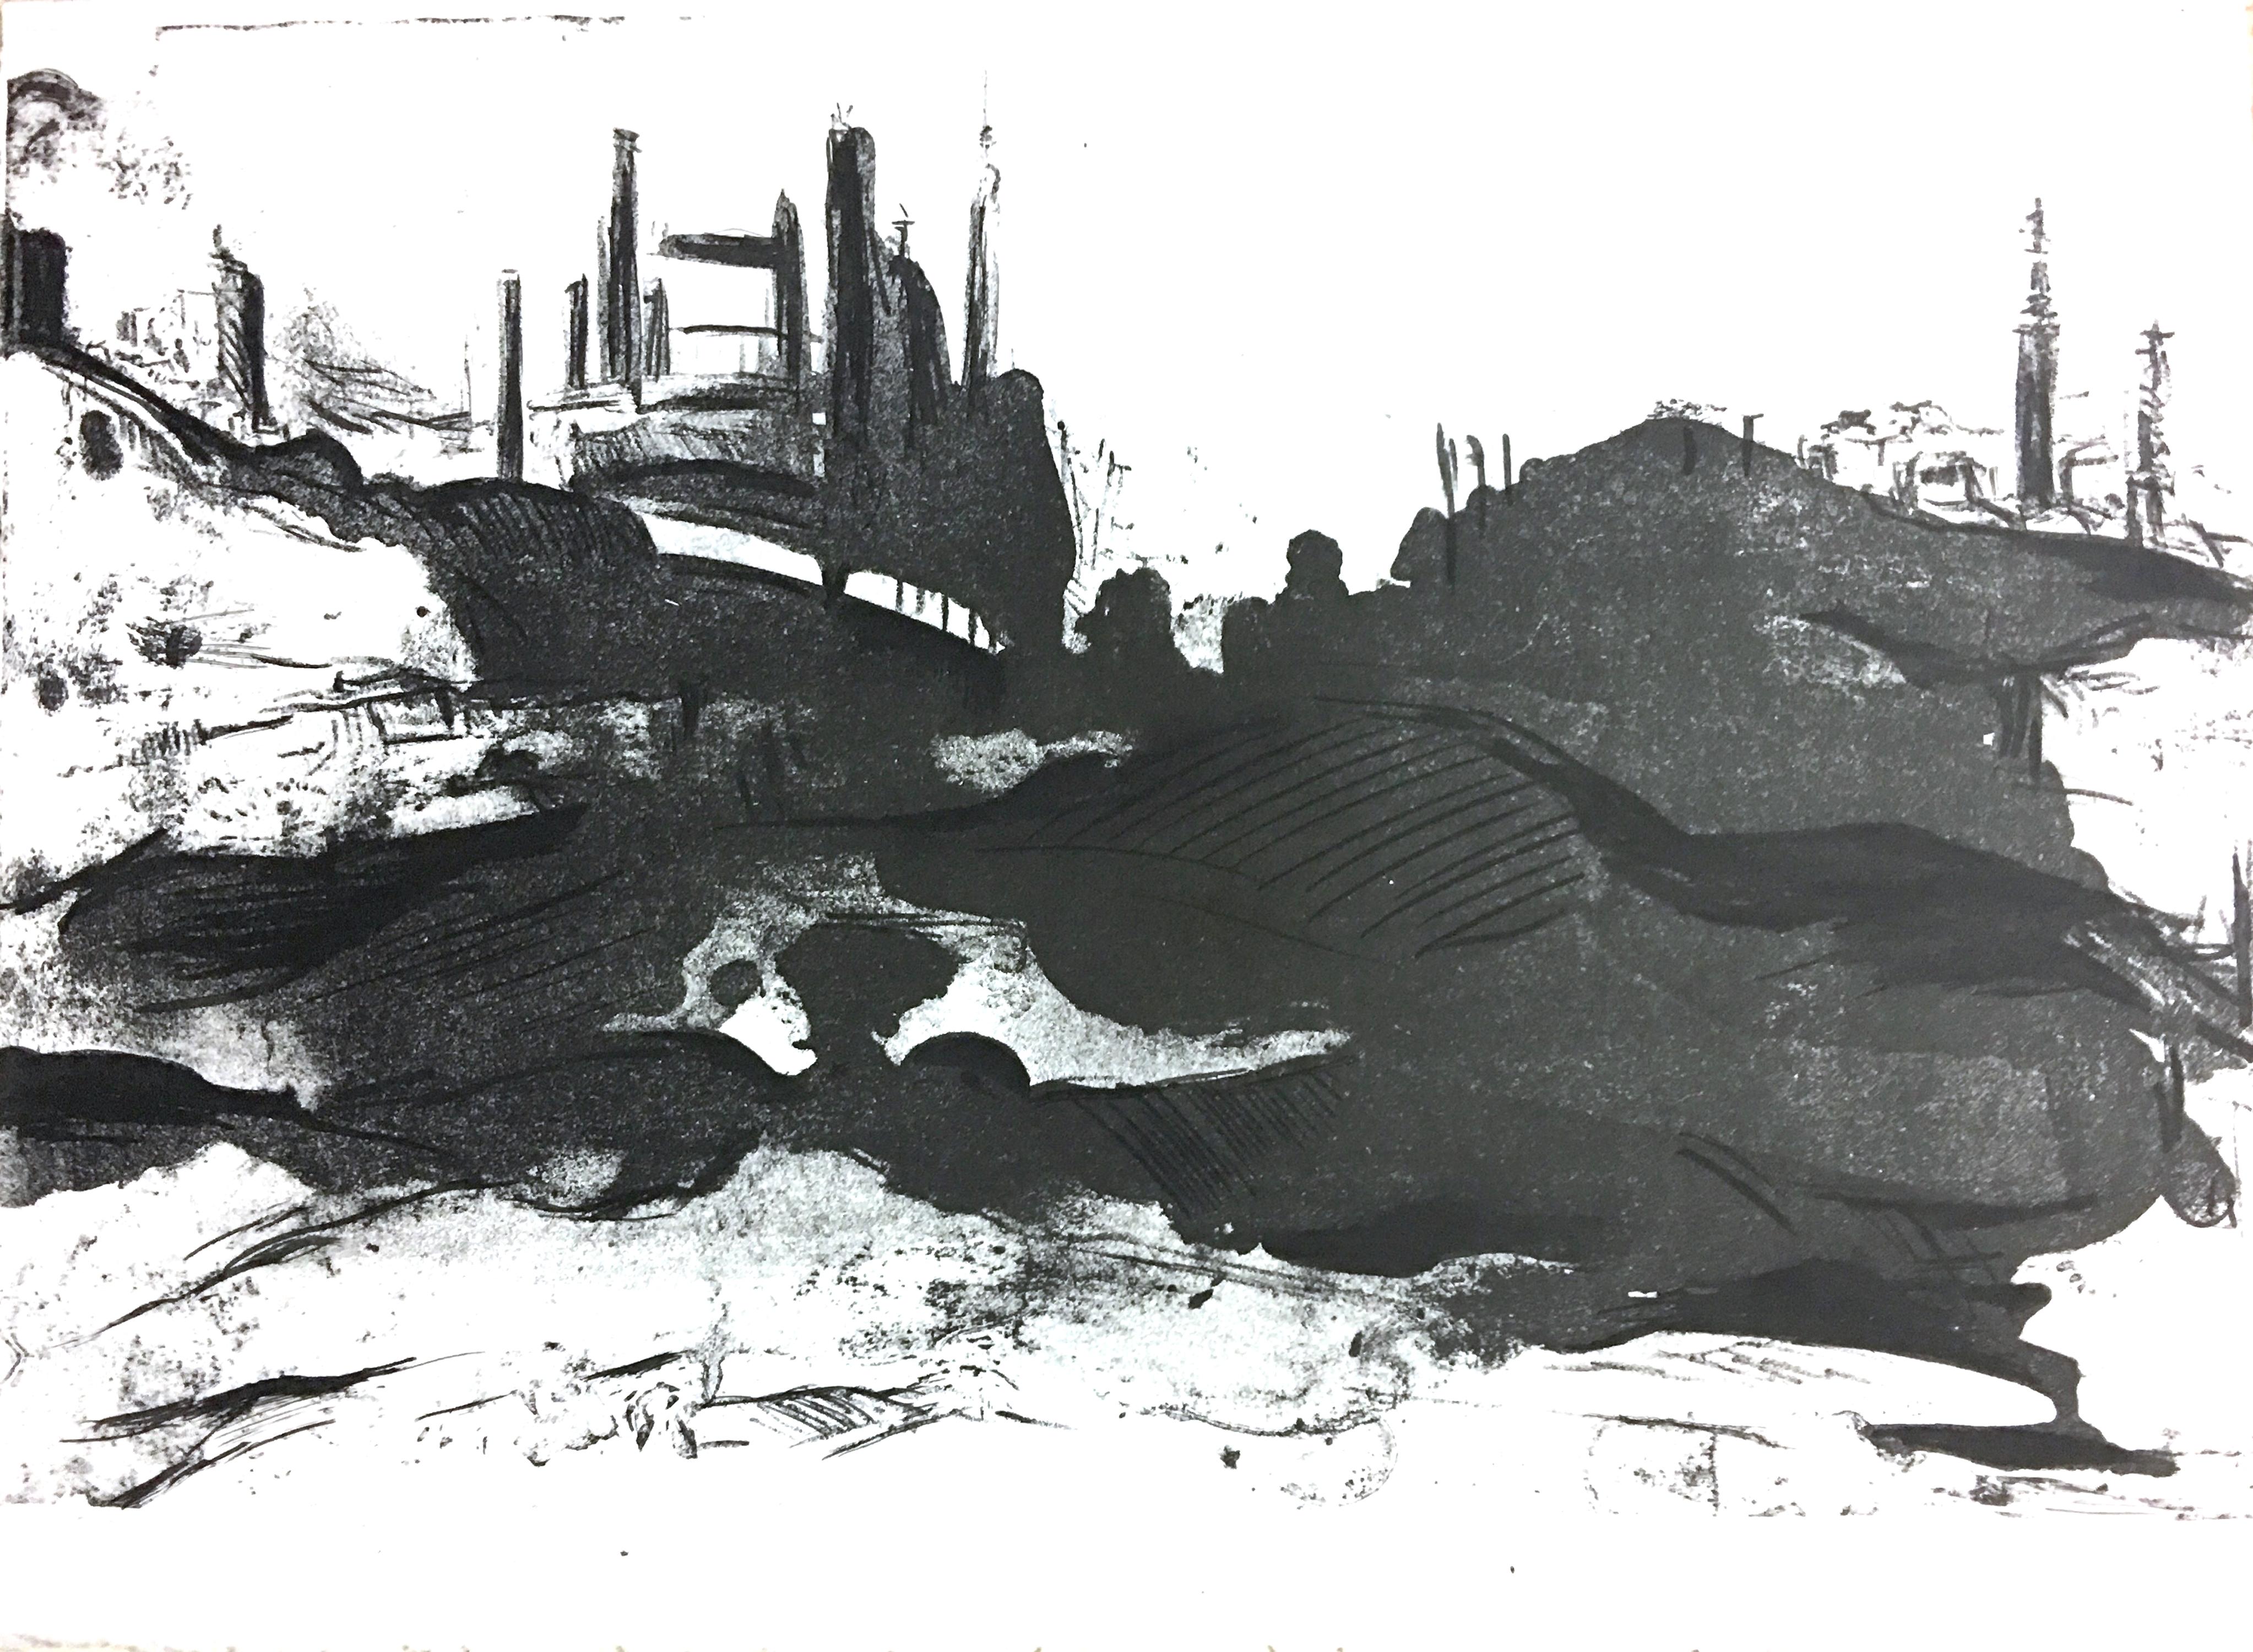 Zahra Nazari Abstract Drawing - “Landscape number 11” black and white landscape abstracts a distant city view 